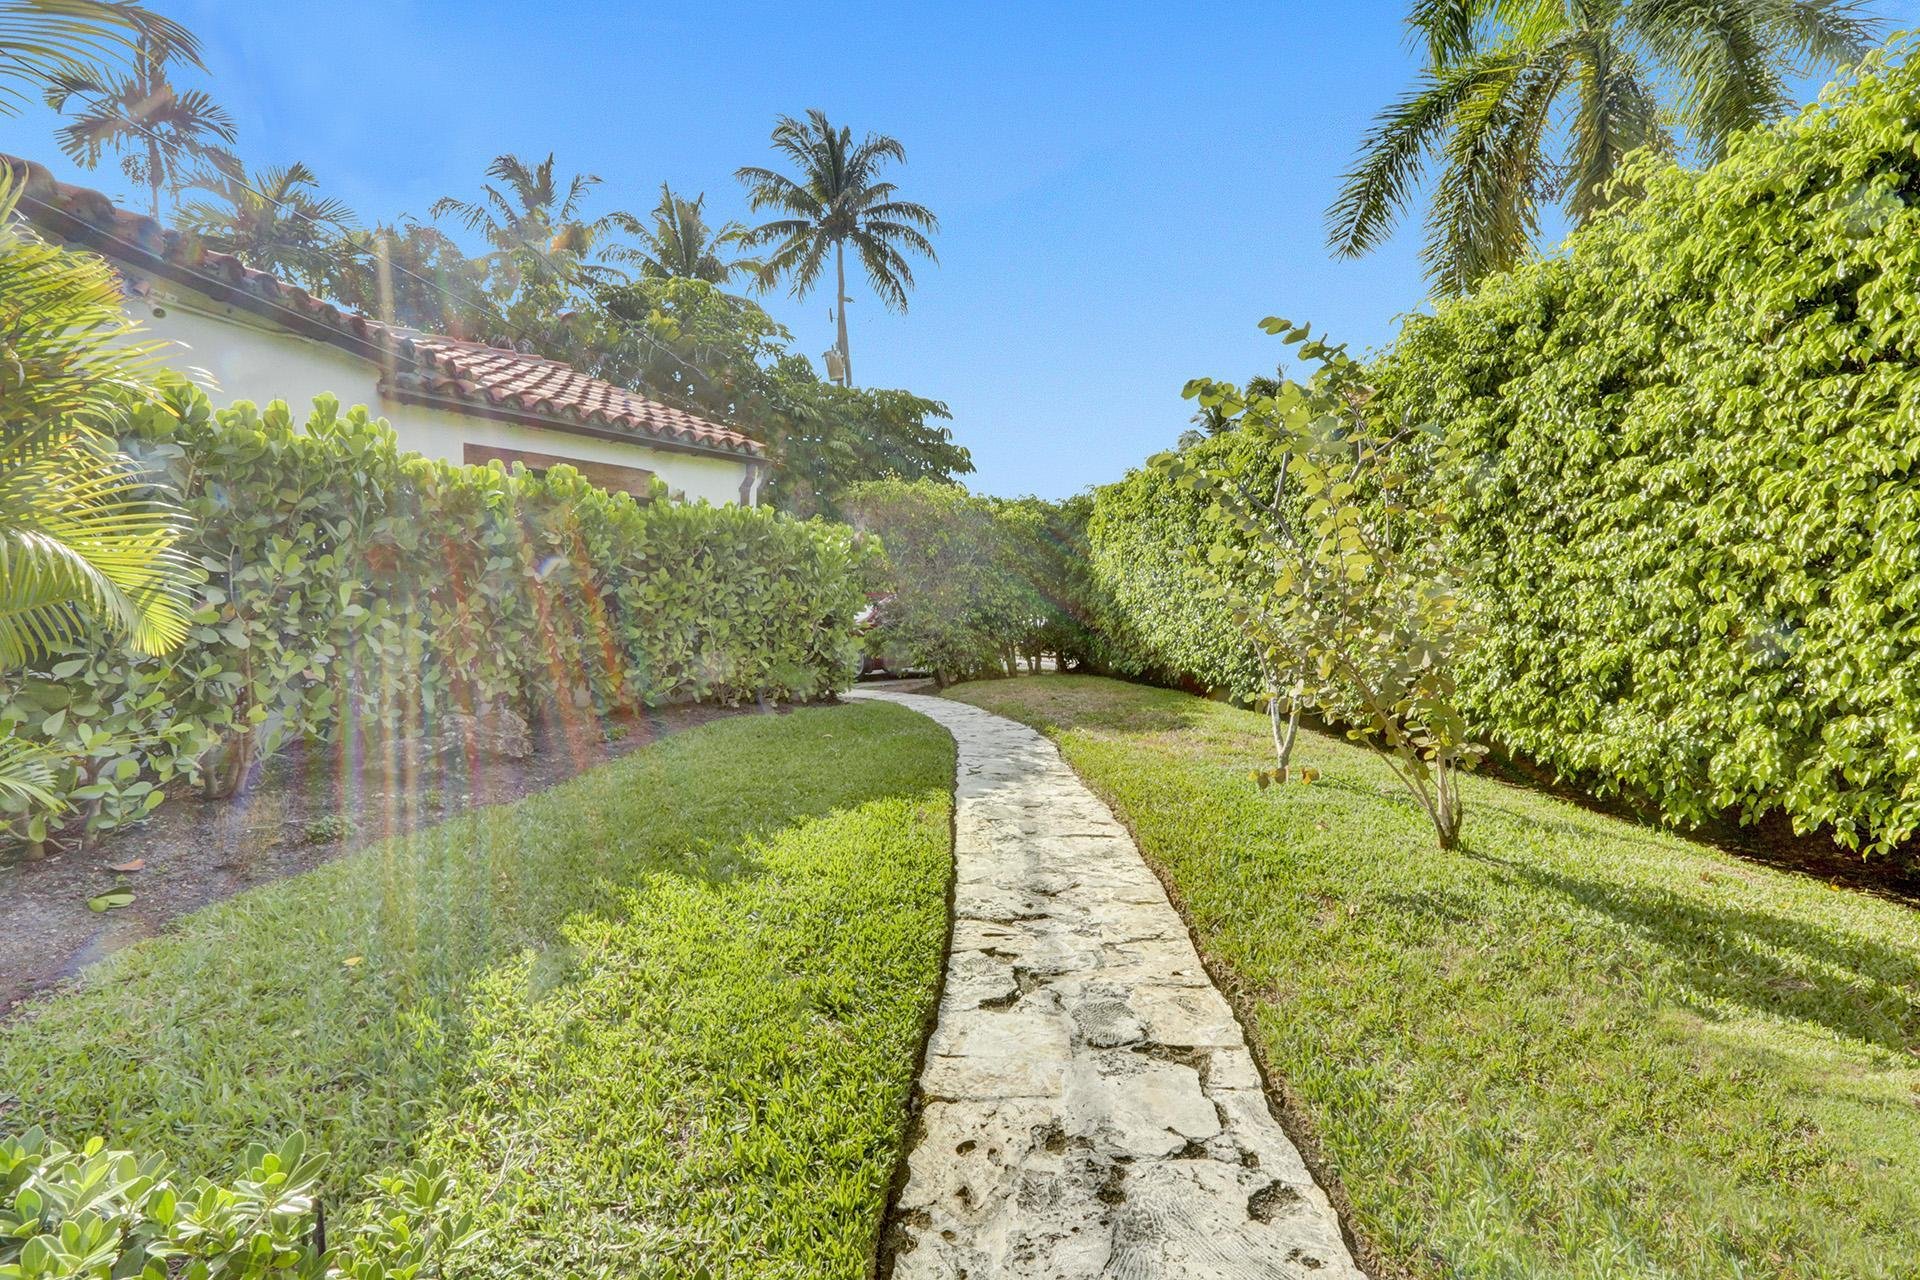 Check Out This Classic Miami Beach Mediterranean On Pine Tree Drive Asking $6.5 Million7.jpg